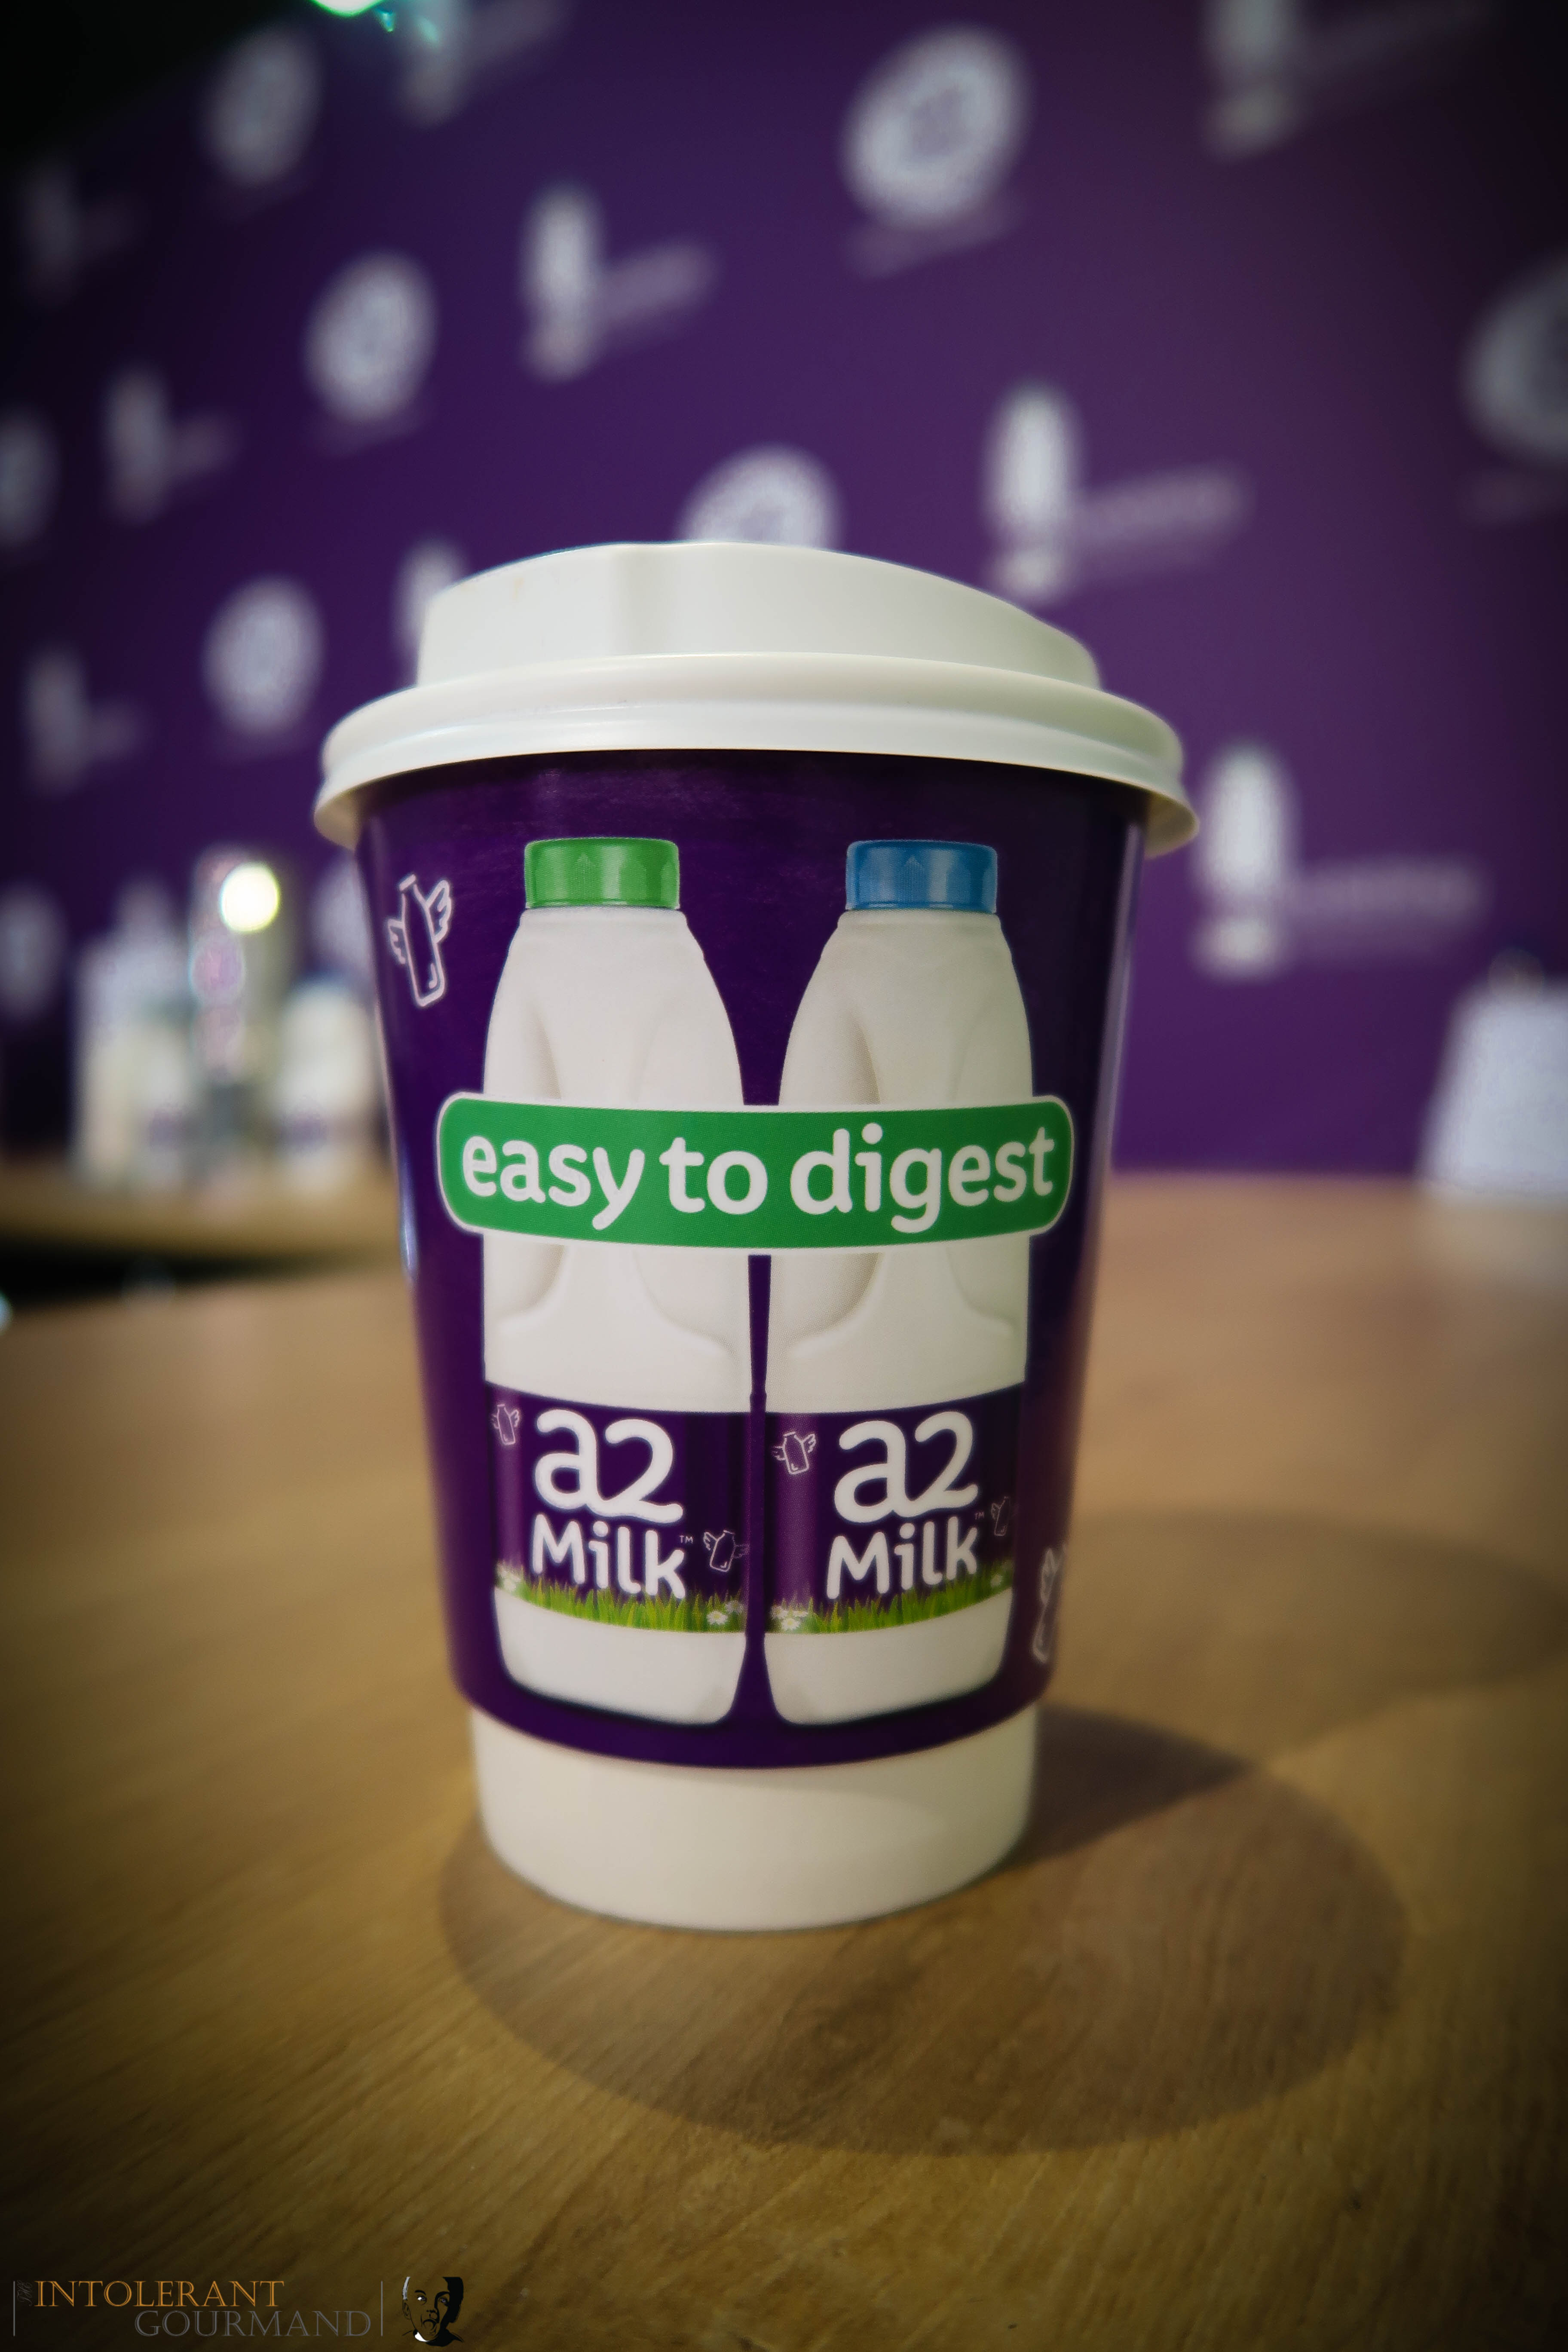 Allergy Show London 2017 - the Free From Cafe at the Allergy Show was sponsored by a2 Milk! This was a delicious latte made with a2 Milk! www.intolerantgourmand.com